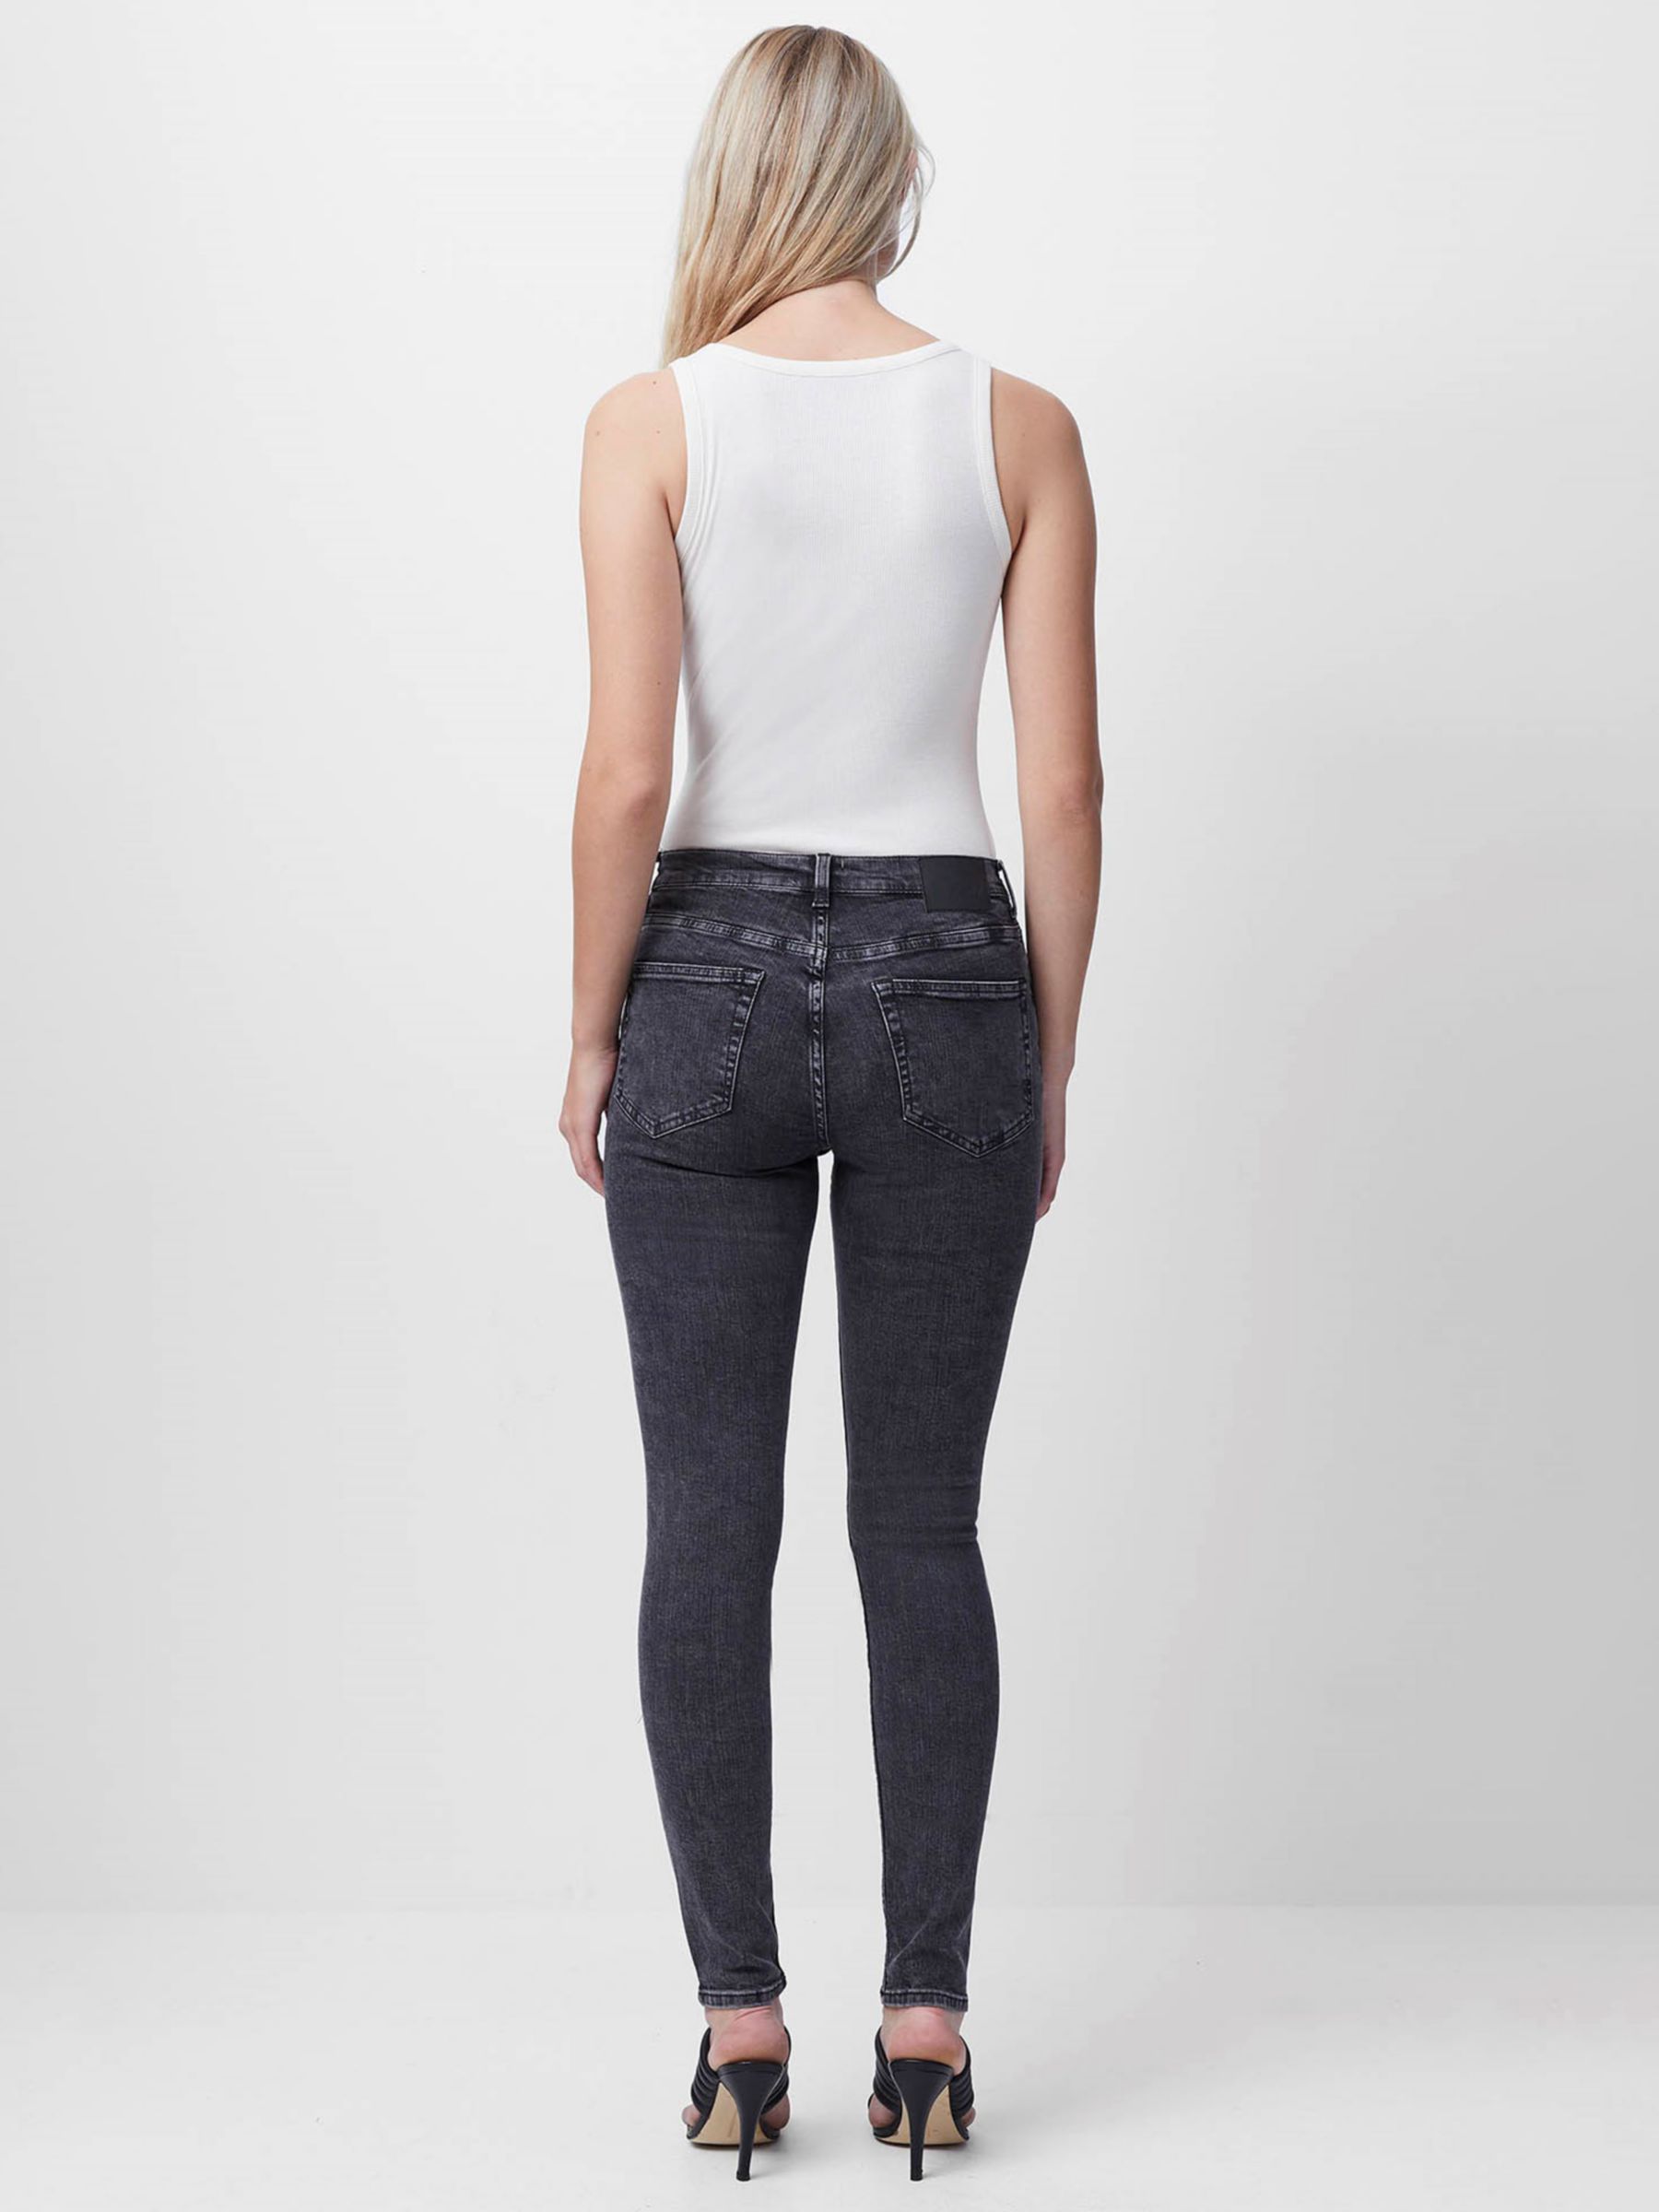 French Connection Rebound Skinny Jeans, Dark Blue at John Lewis & Partners